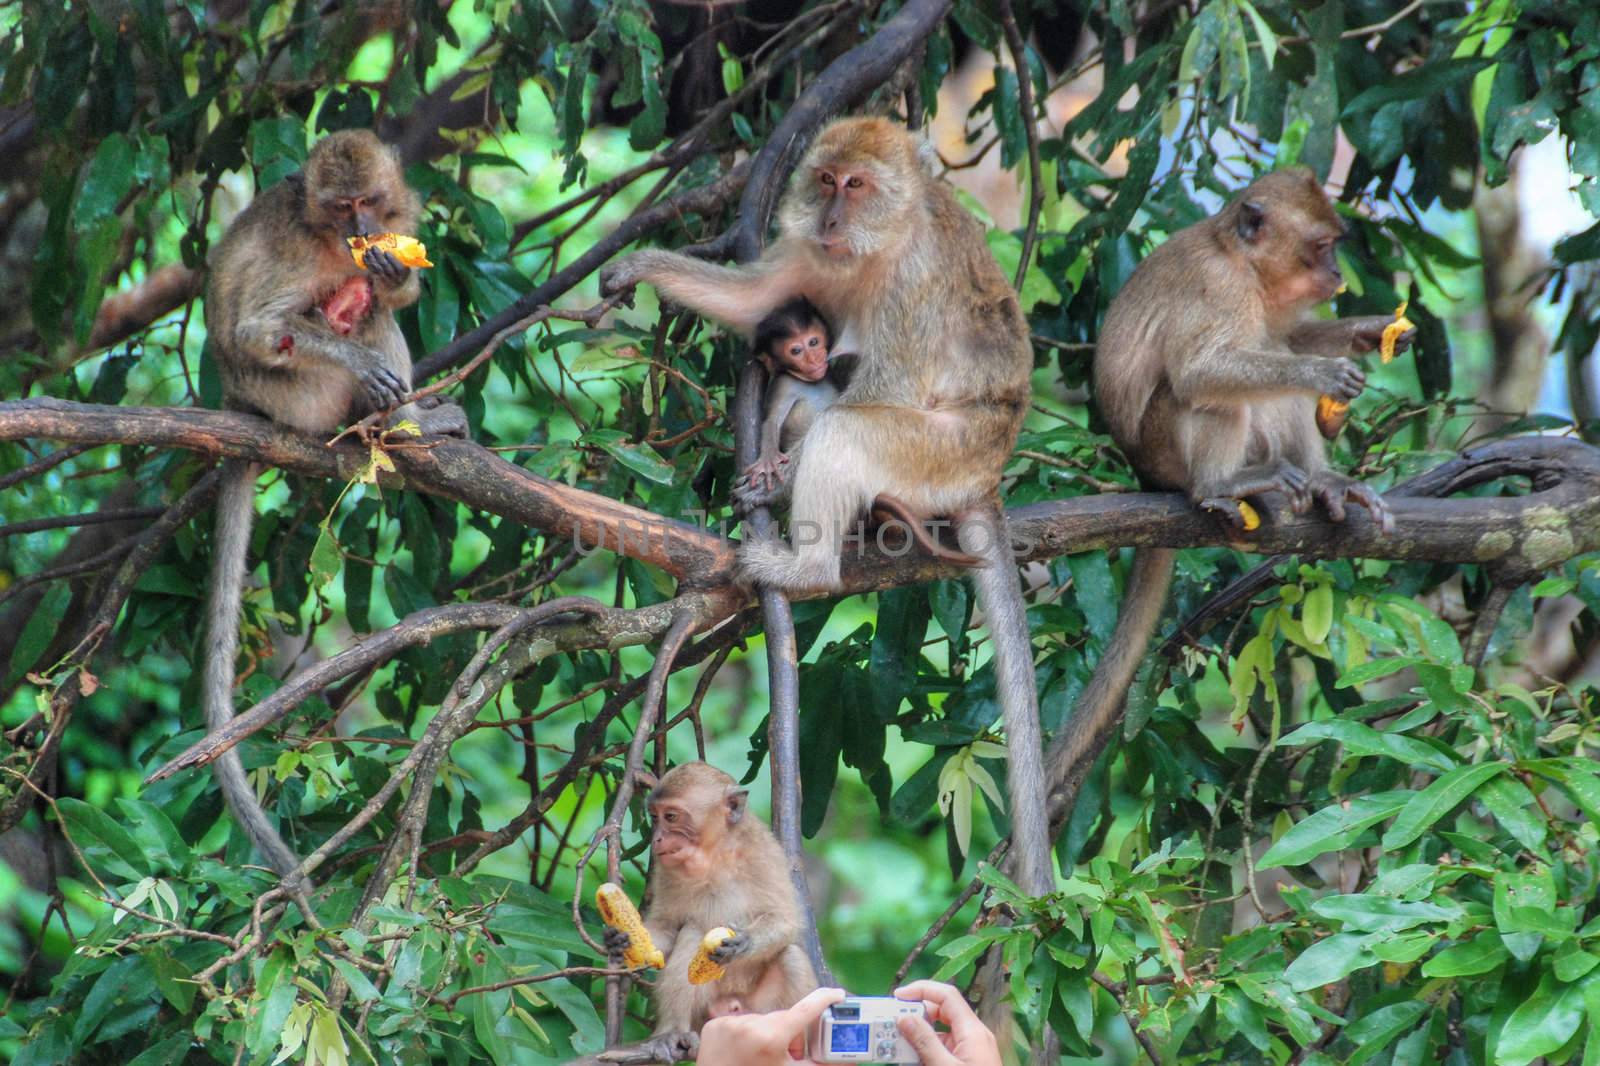 Group of Monkeys, Changmai, Thailand, August 2007 by jovannig